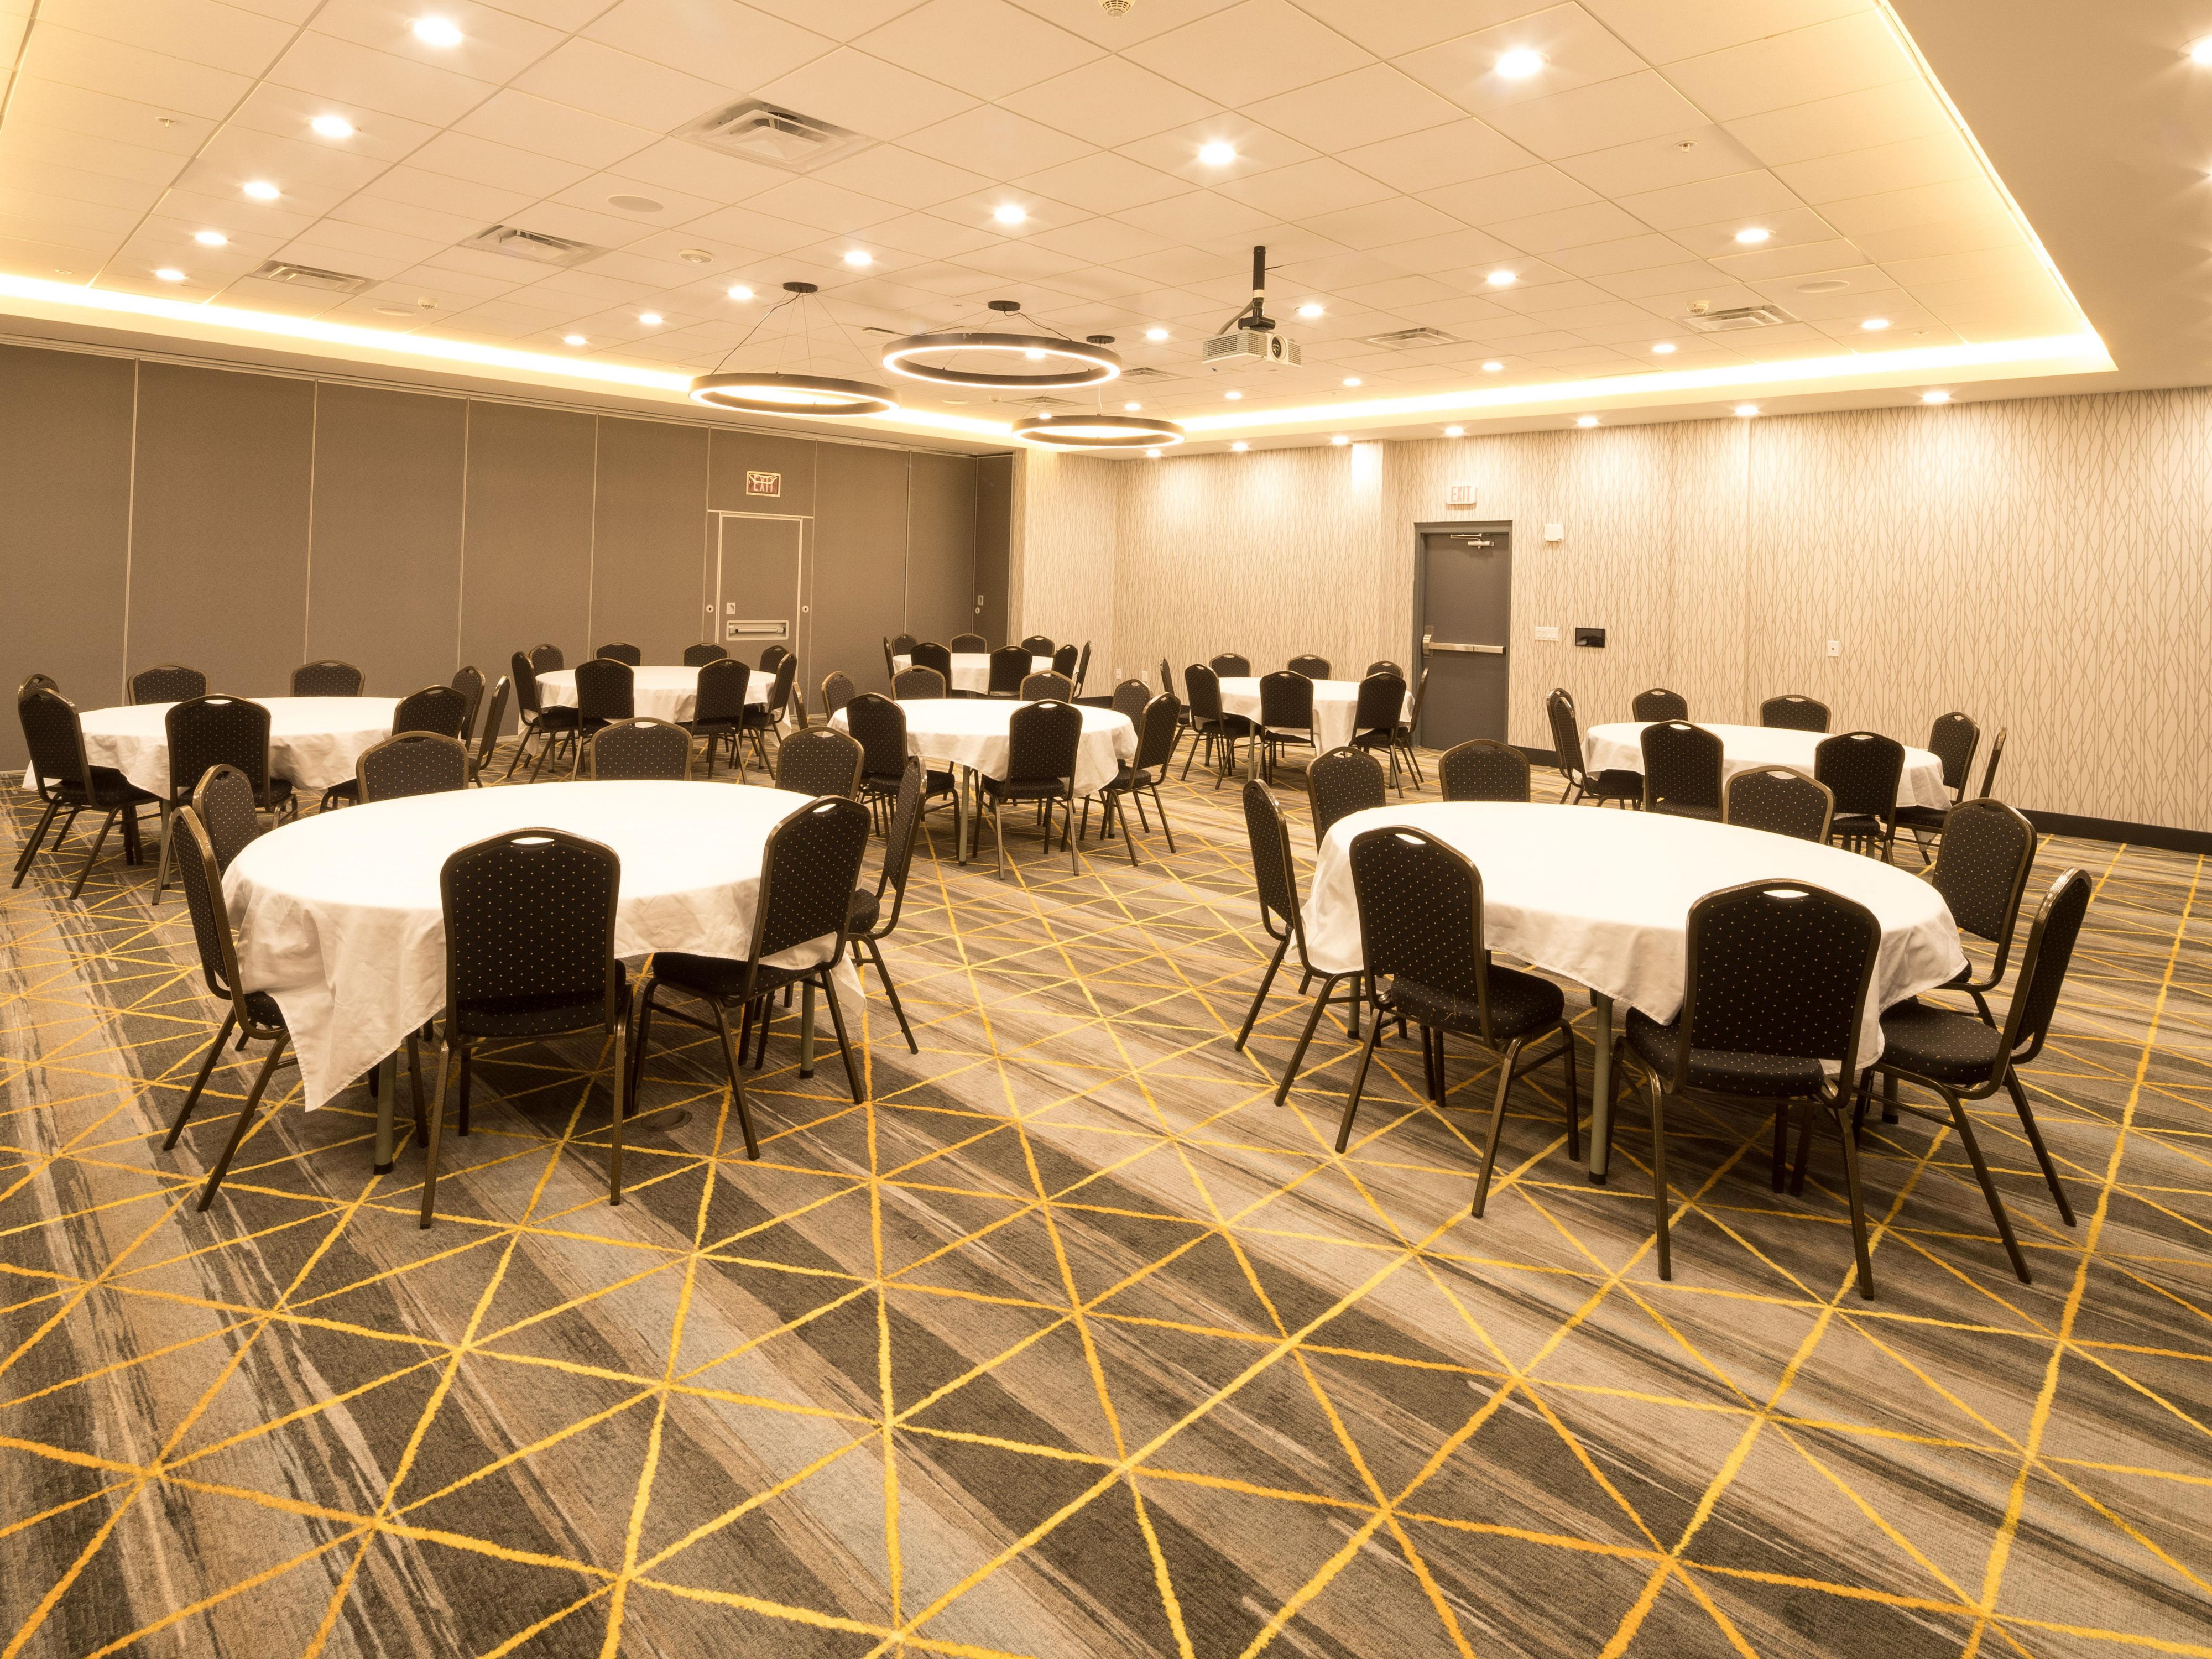 Our Western ballroom that can be split into two is the perfect space for your group or wedding. Equipped with up to date technology including a built in projector & screen for presentations, as well as built in sound system, Complimentary Wi-Fi and Business Center is available for any of your office needs.